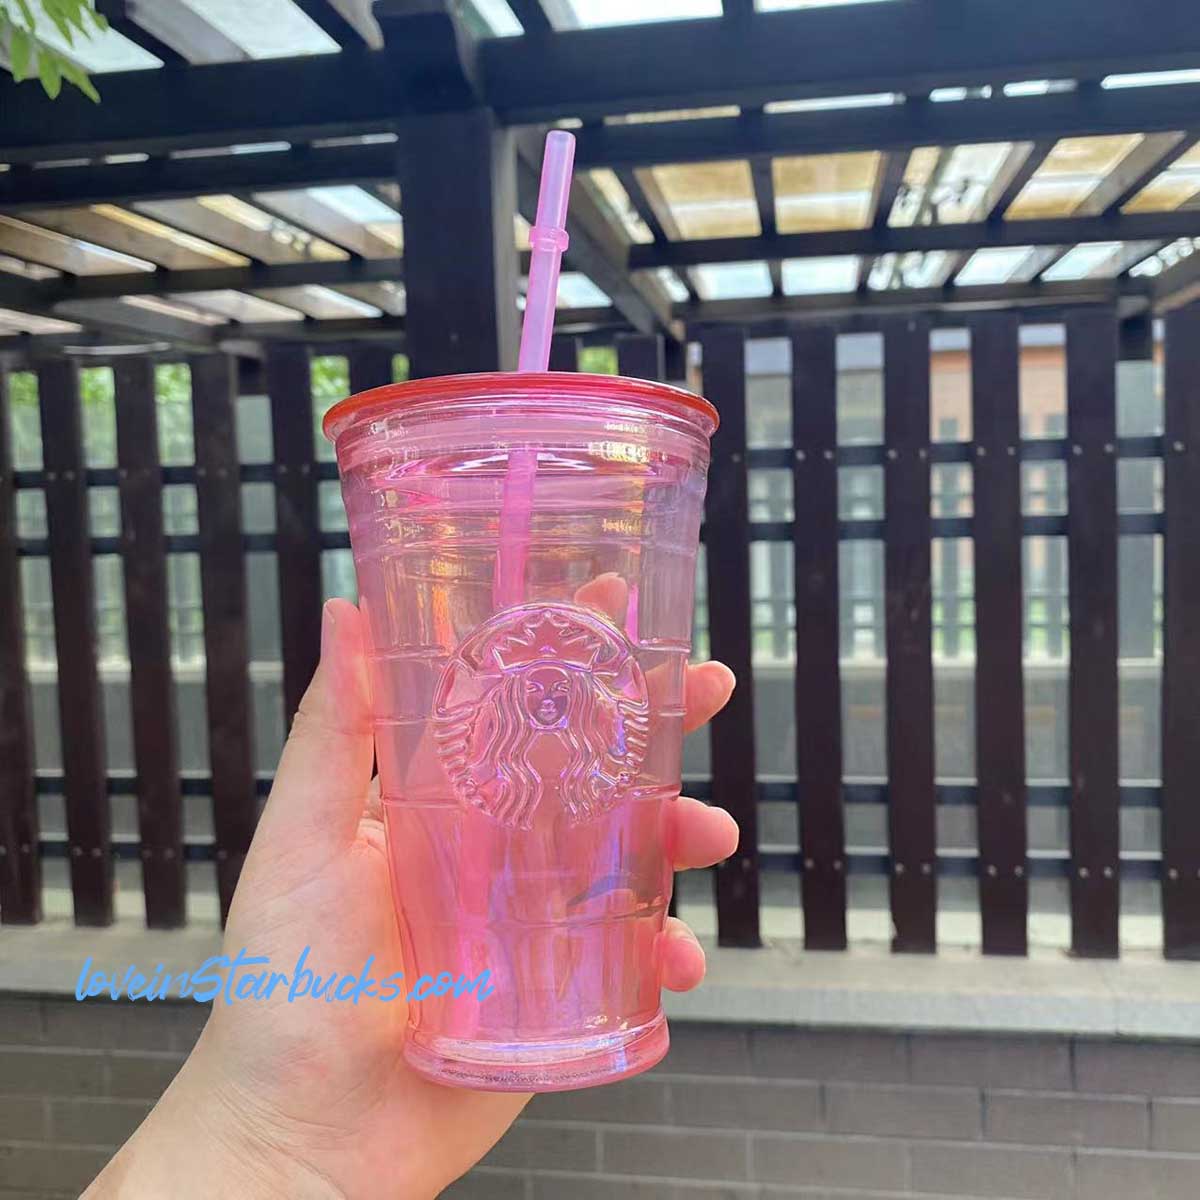 Starbucks Recycled Glass Cold Cup